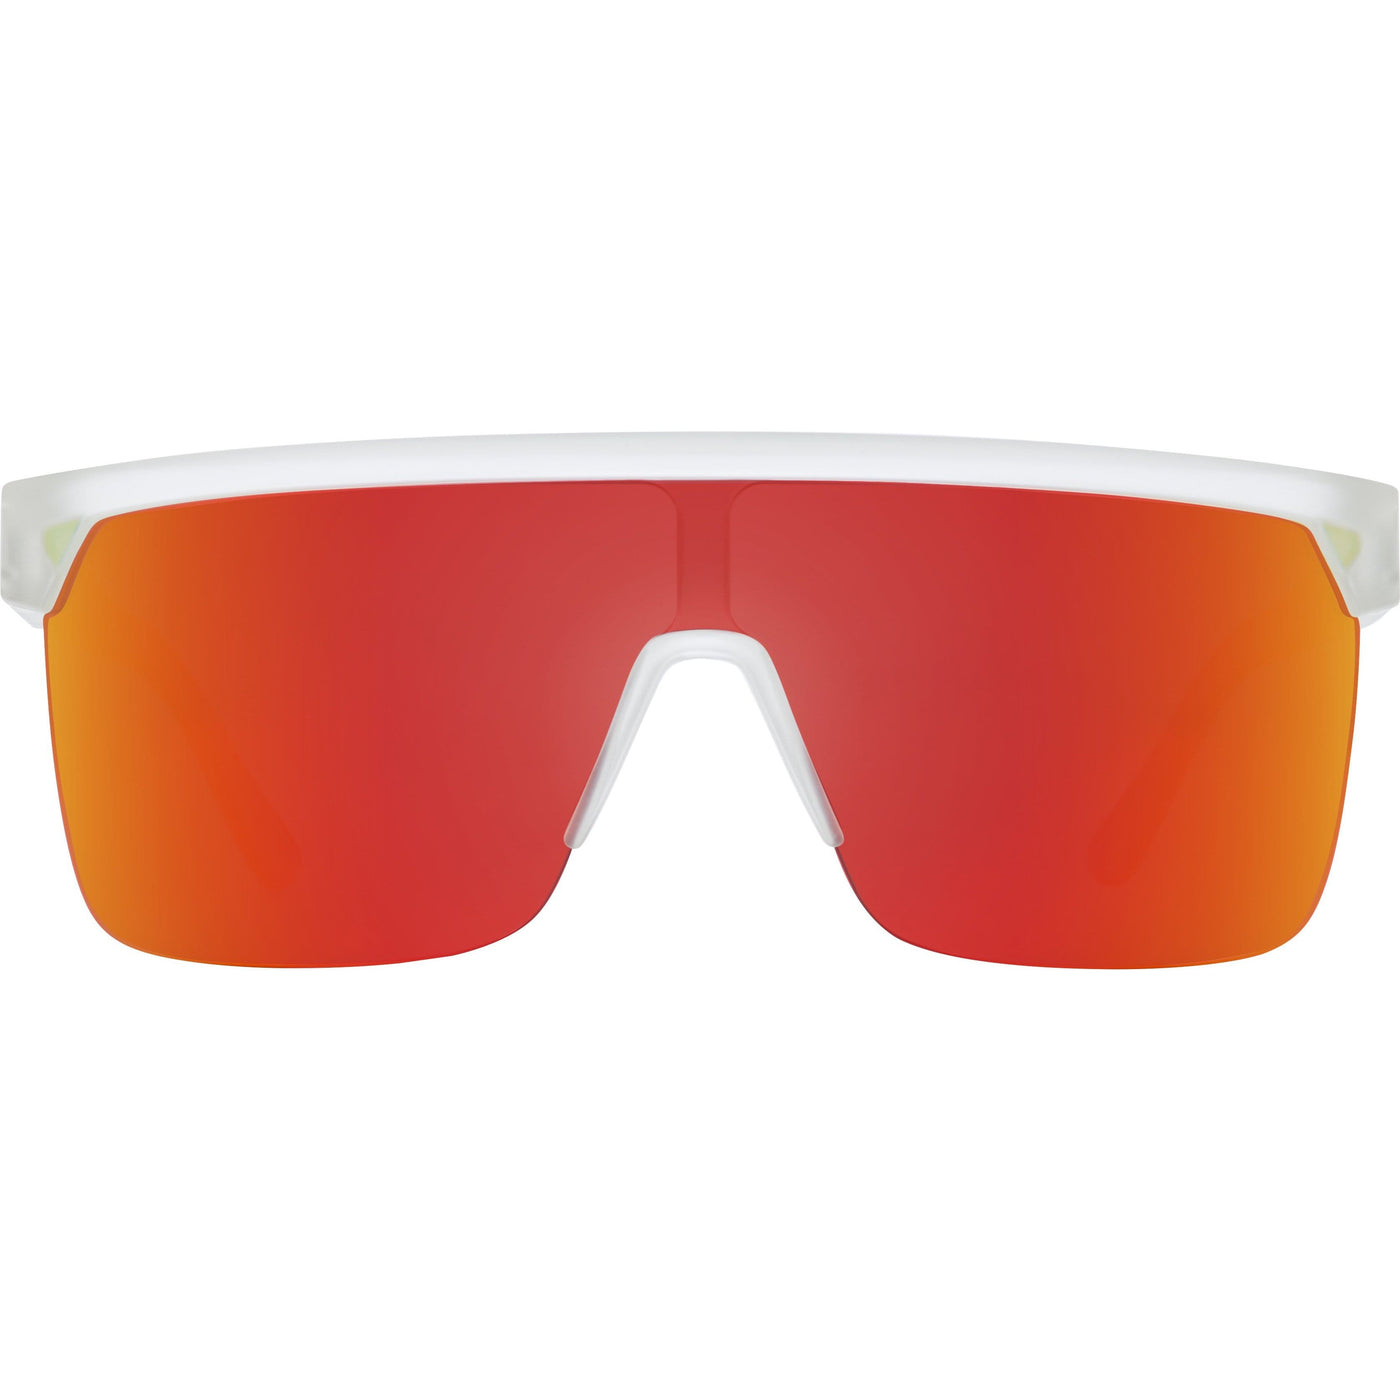 SPY FLYNN 5050 Sunglasses, Happy Lens - Red 8Lines Shop - Fast Shipping